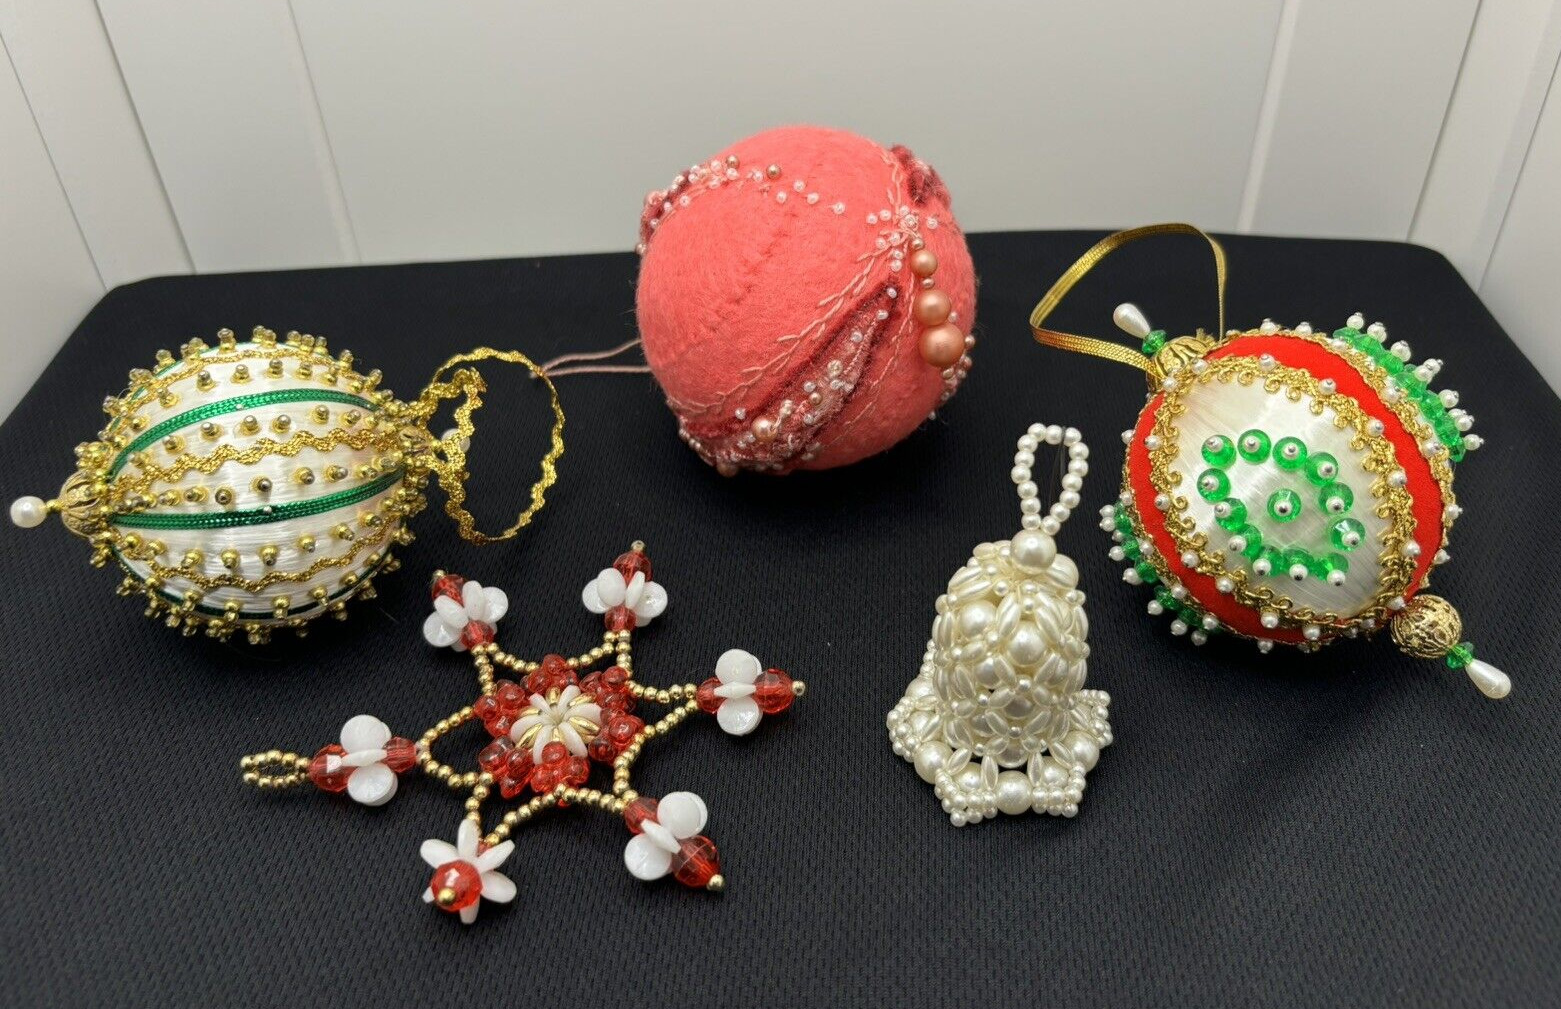 Mixed Lot of 5 Handmade, Beaded or Felted Wool  Vintage Christmas Ornaments 